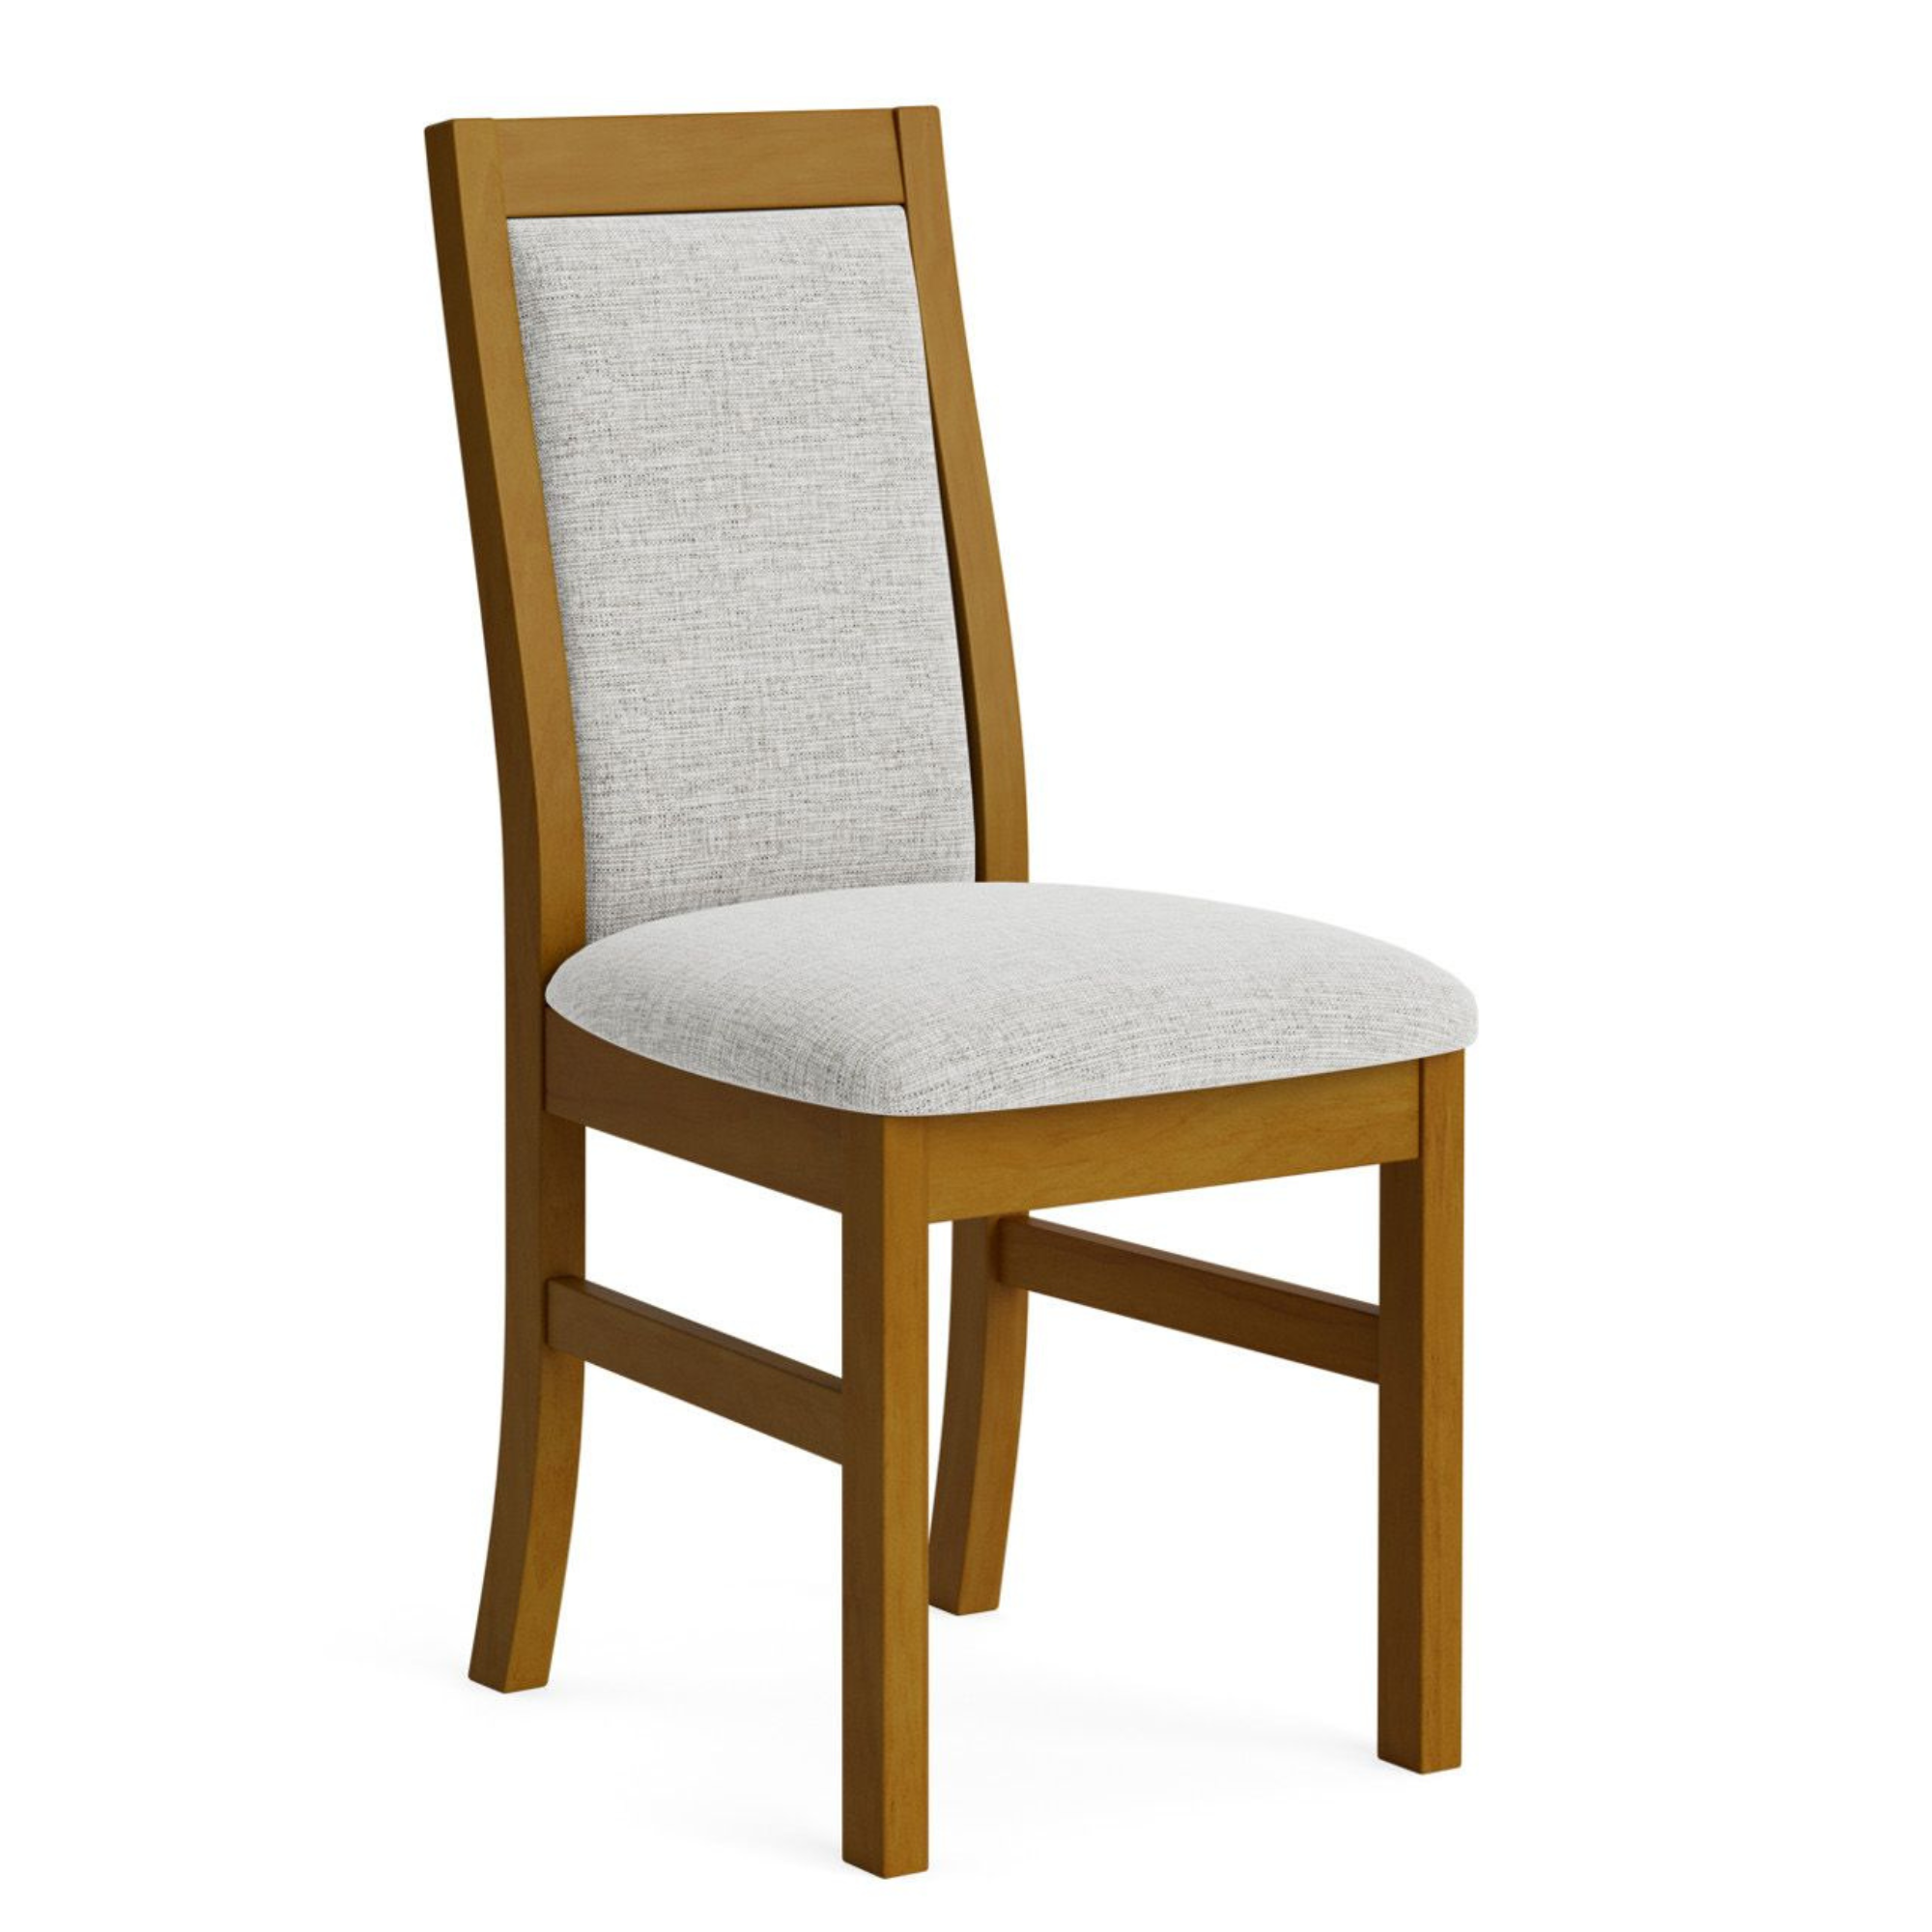 CHARLTON PADDED BACK DINING CHAIR | CHOOSE YOUR OWN FABRIC | NZ MADE